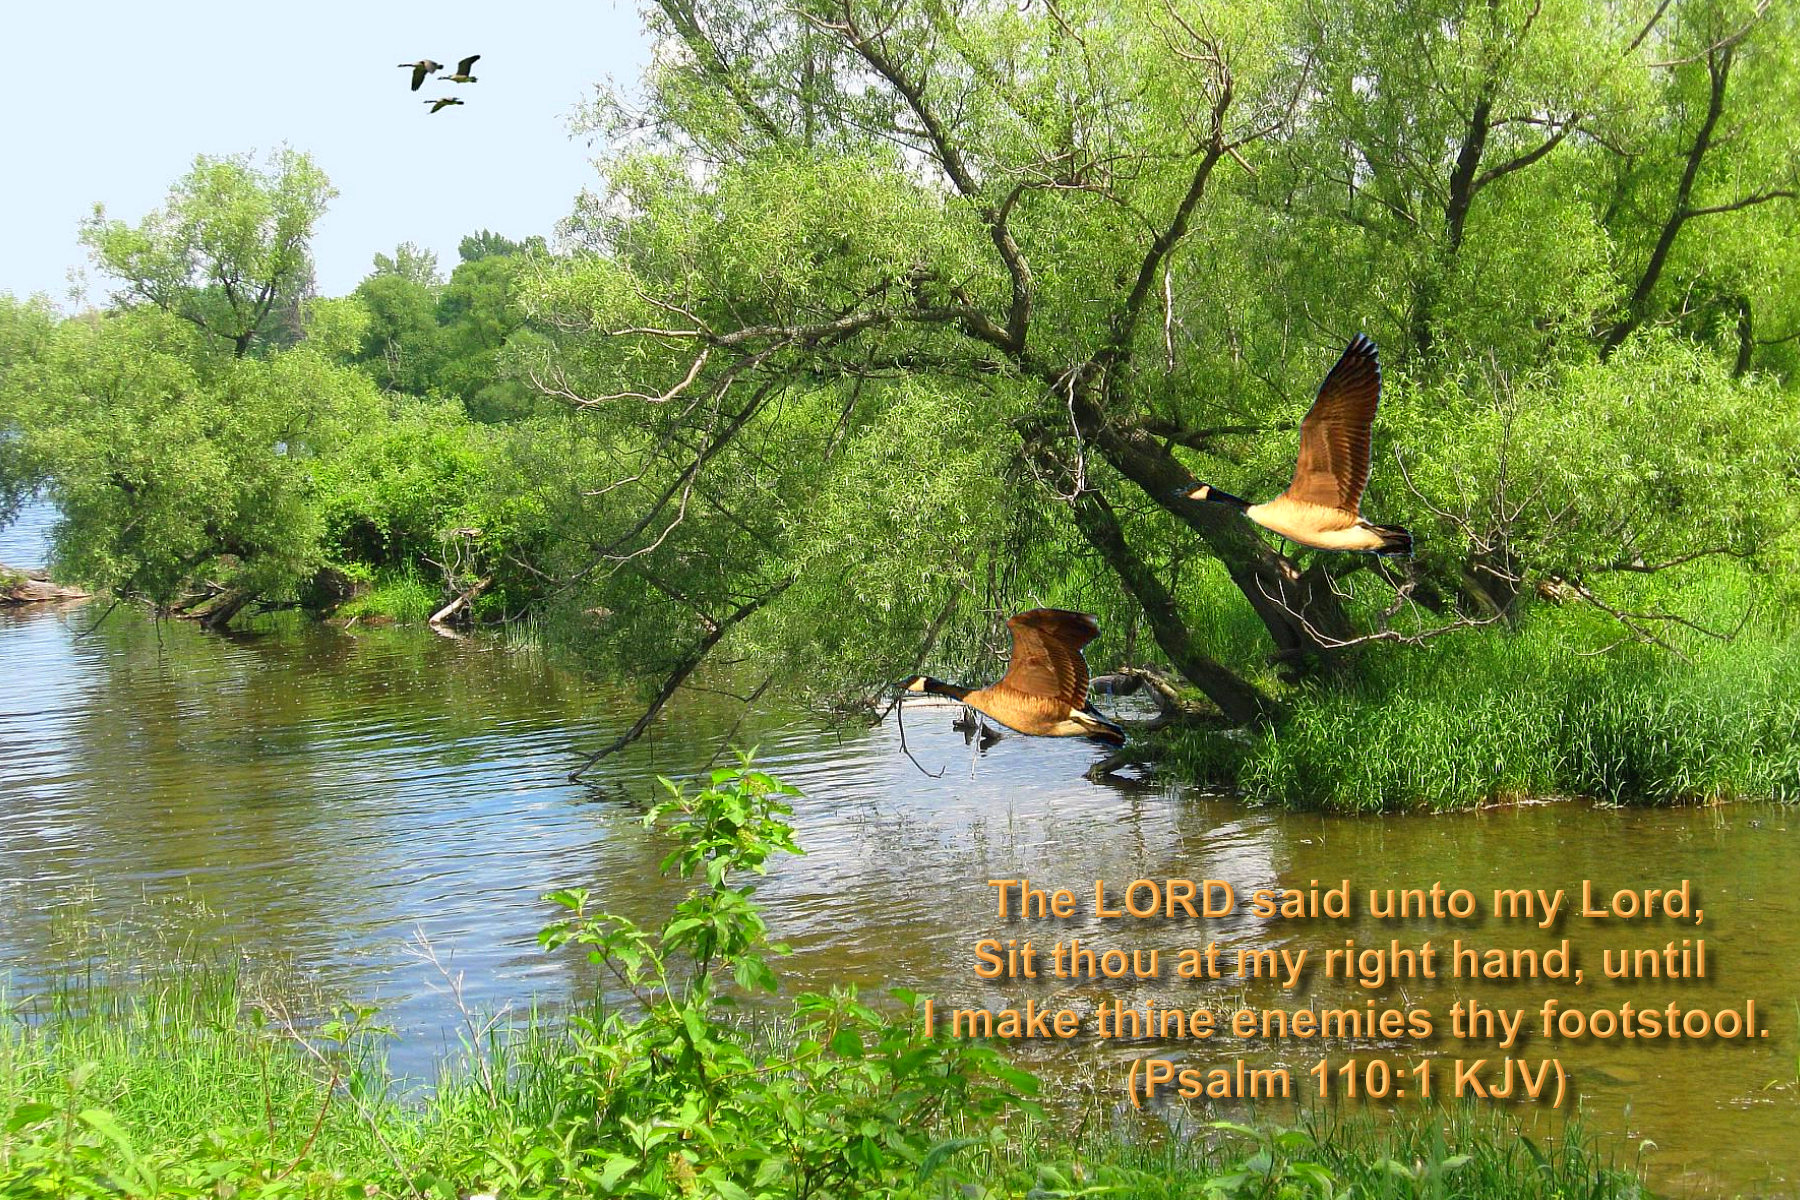 BIBLE VERSED WALLPAPER CLICK ON IMAGE TO SEE FULL SIZE, TO COPY AS WELL